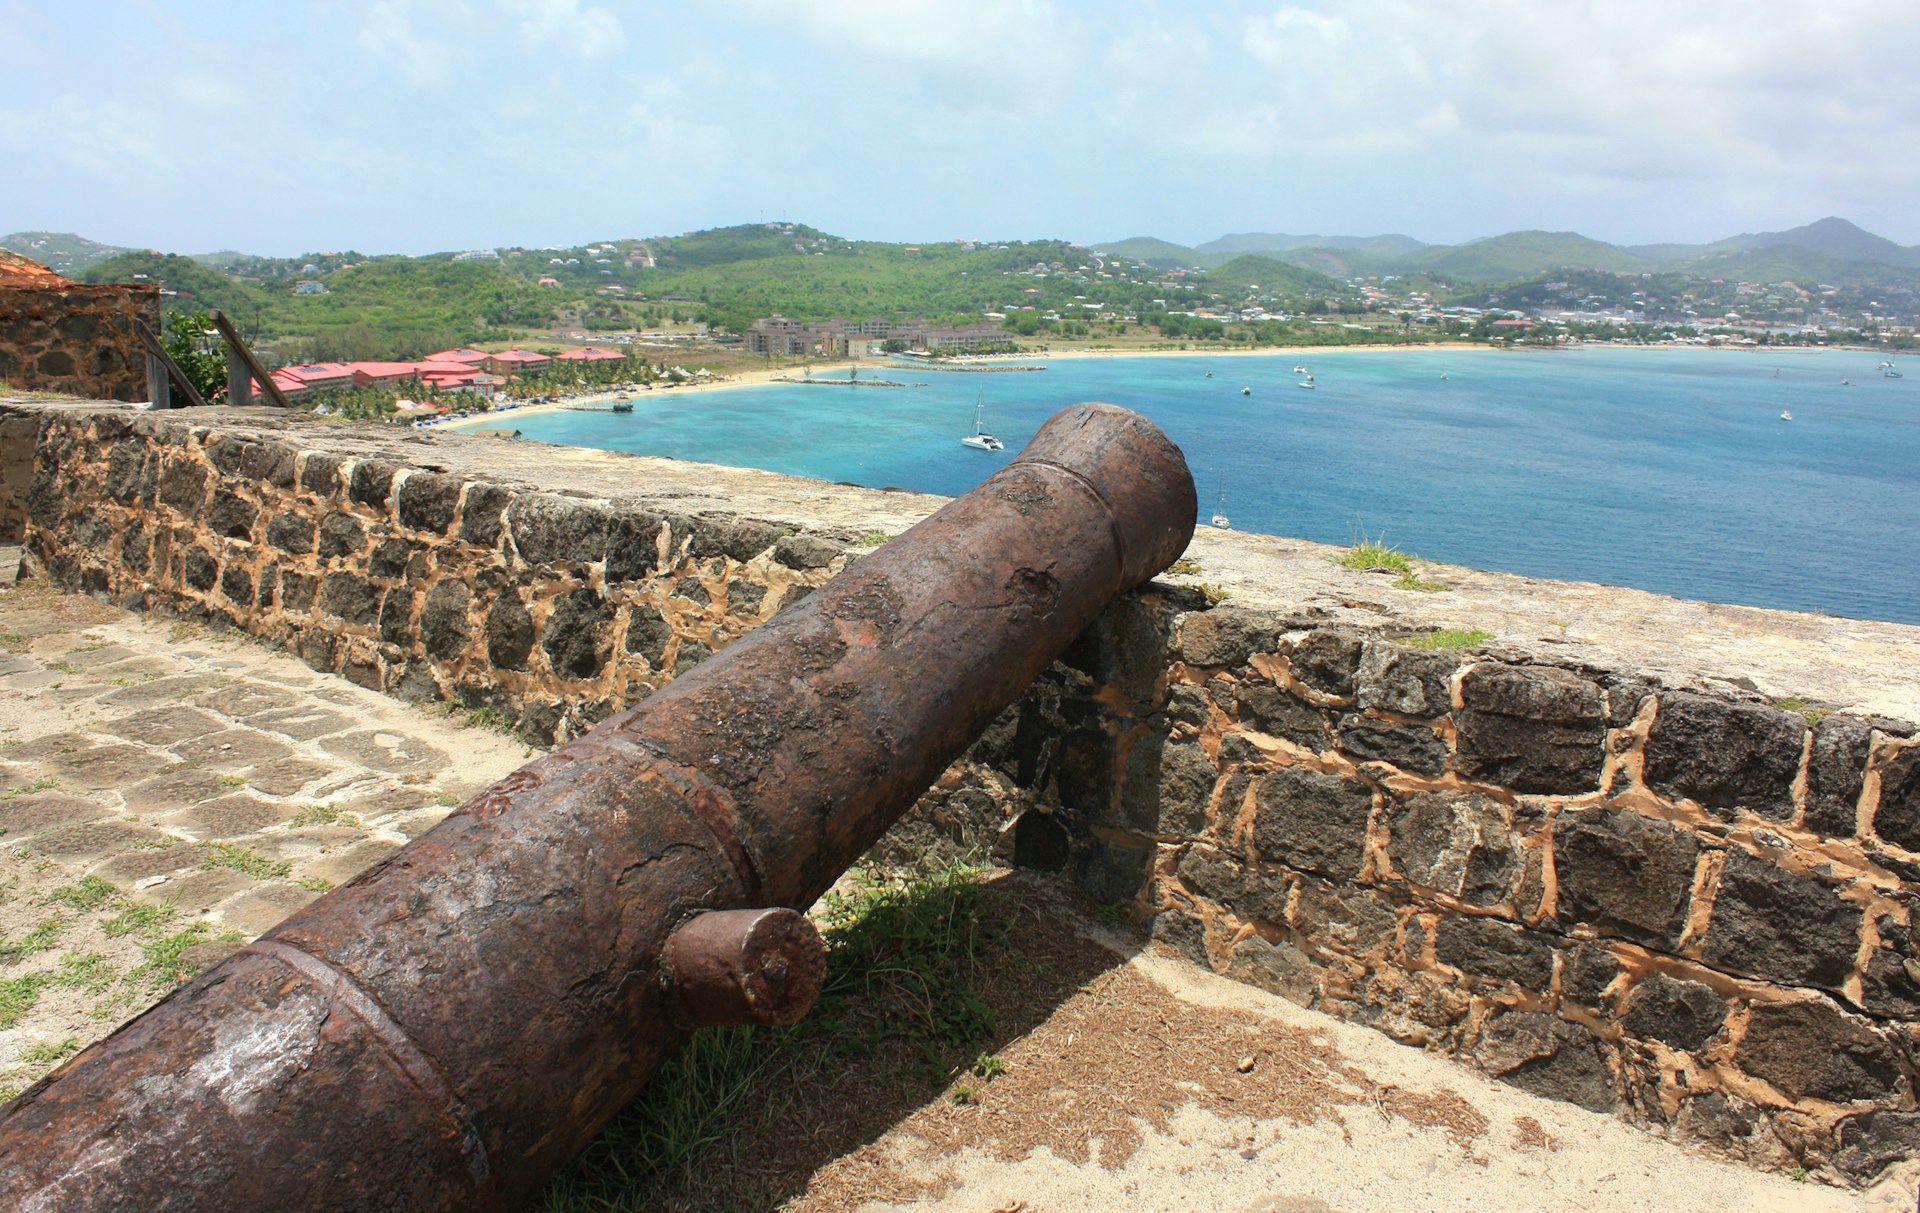 Canon in a fort on Pigeon Island, overlooking a St. Lucia Beach and mountains